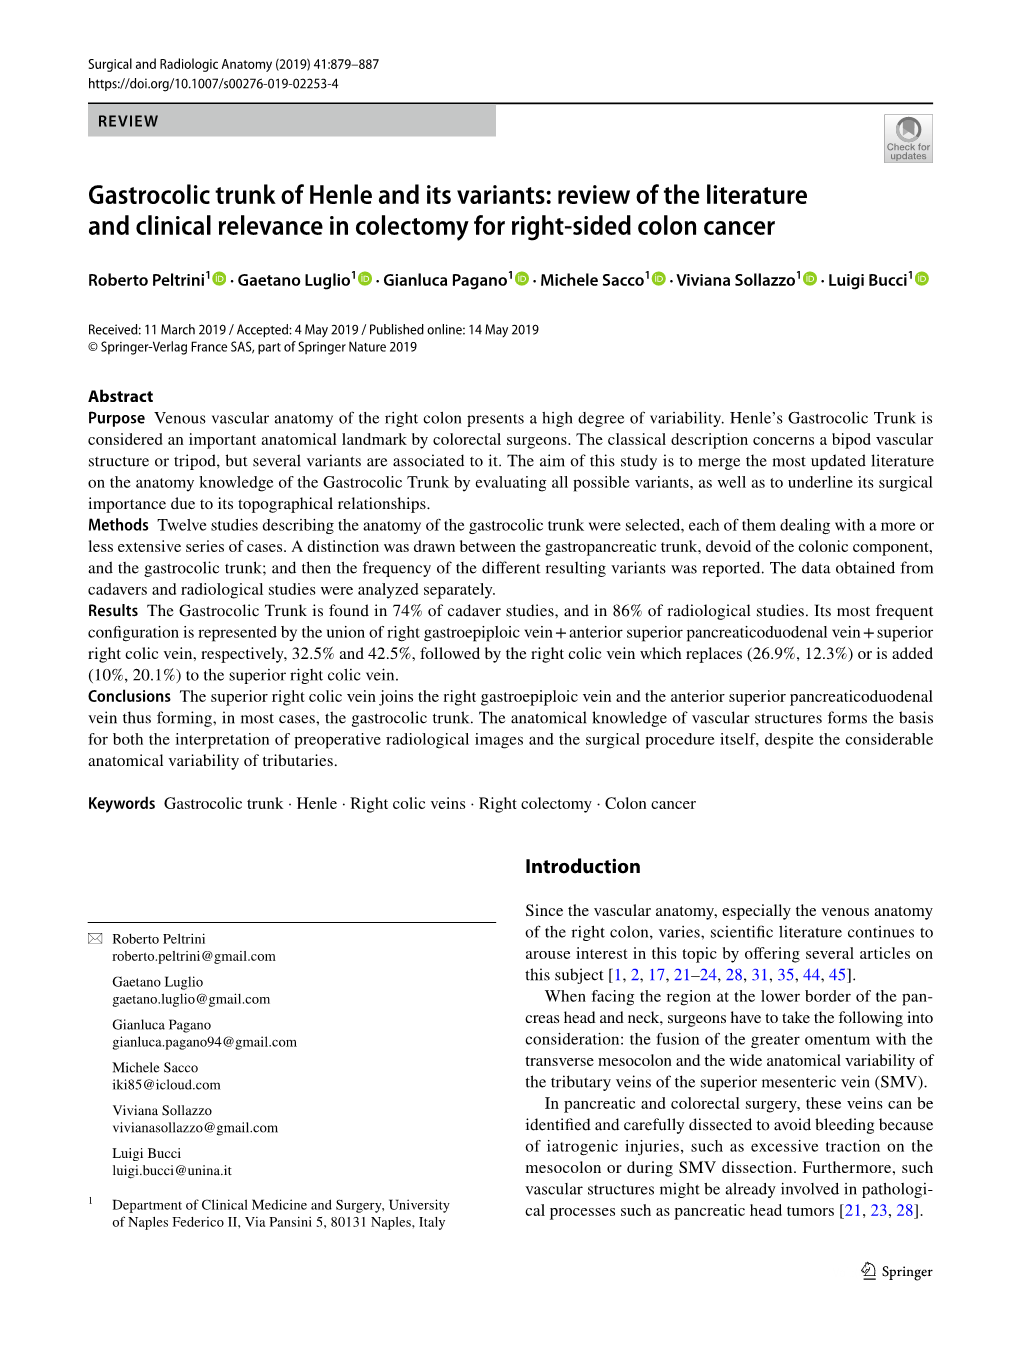 Gastrocolic Trunk of Henle and Its Variants: Review of the Literature and Clinical Relevance in Colectomy for Right‑Sided Colon Cancer